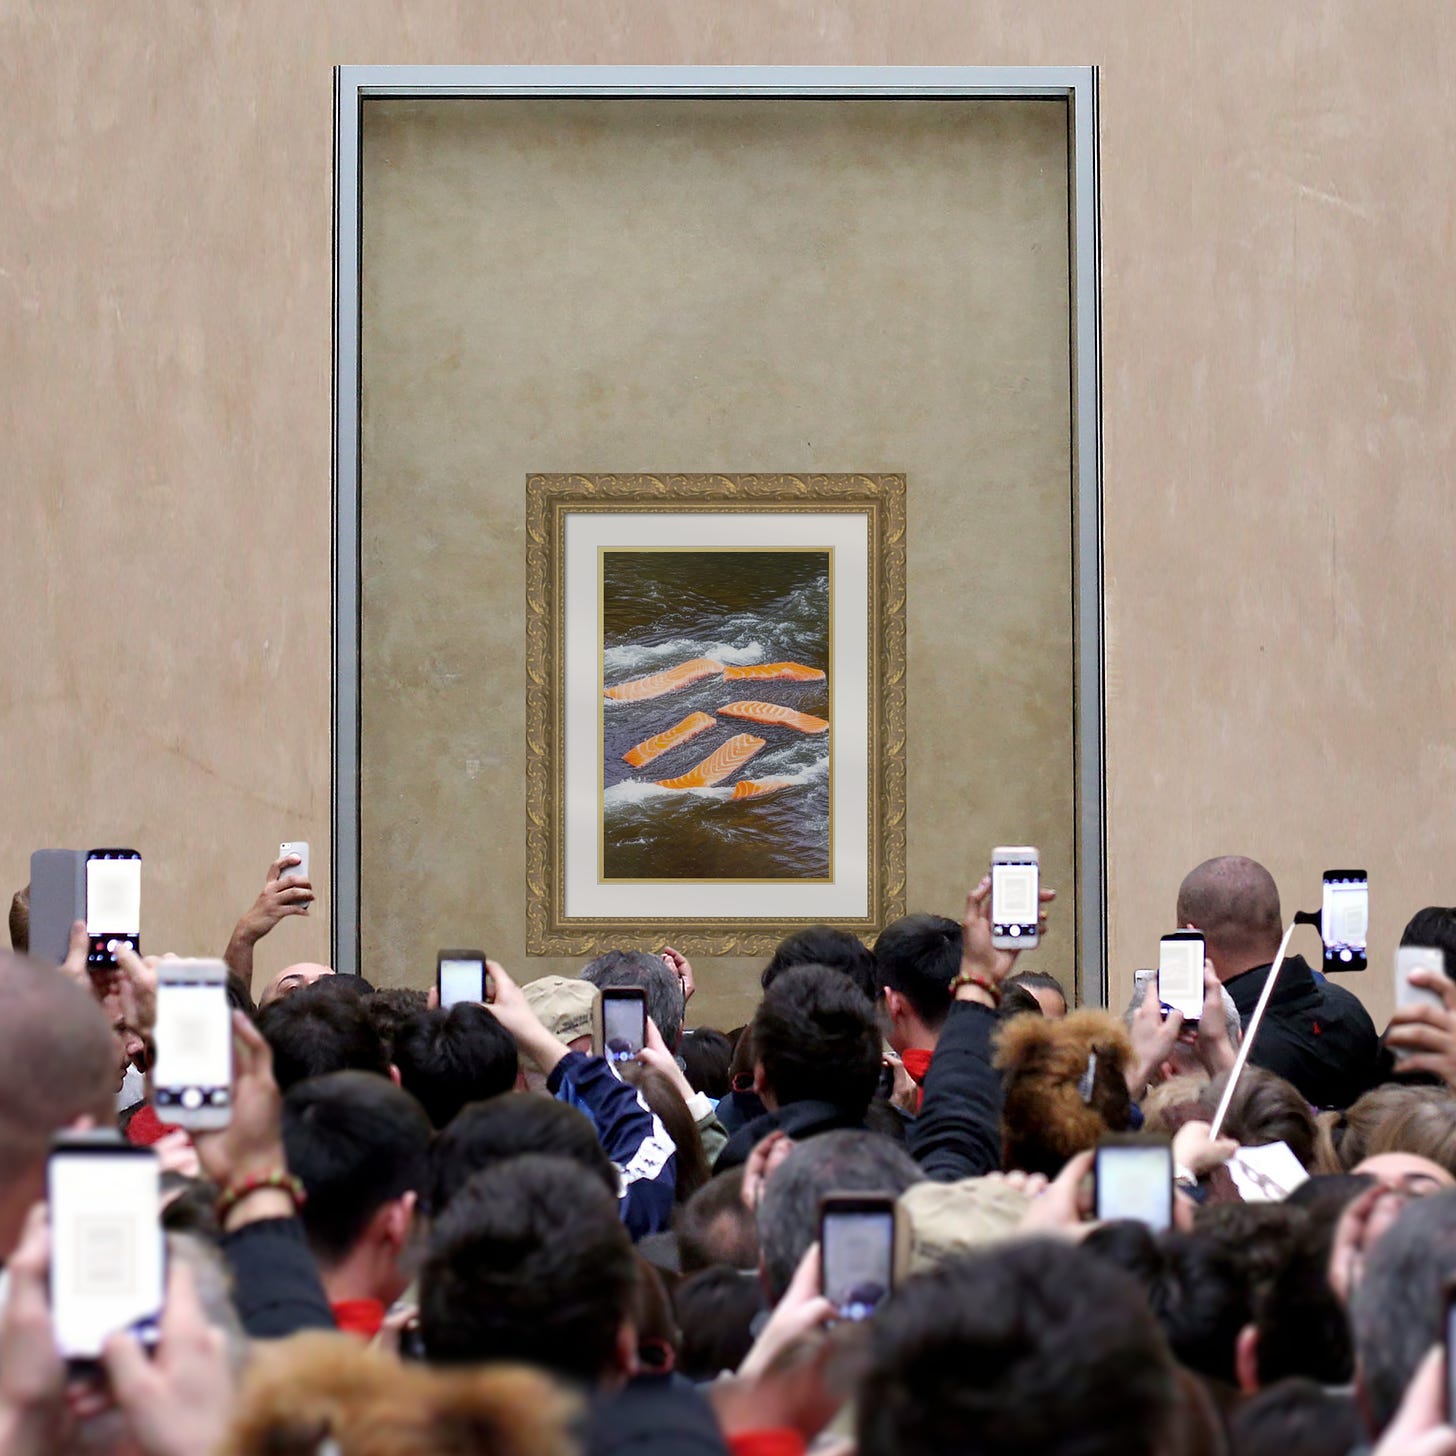 Museum goers at the Louvre photographing the Mona Lisa behind glass, but instead of the Mona Lisa it's a AI-generated image of salmon filets floating in water